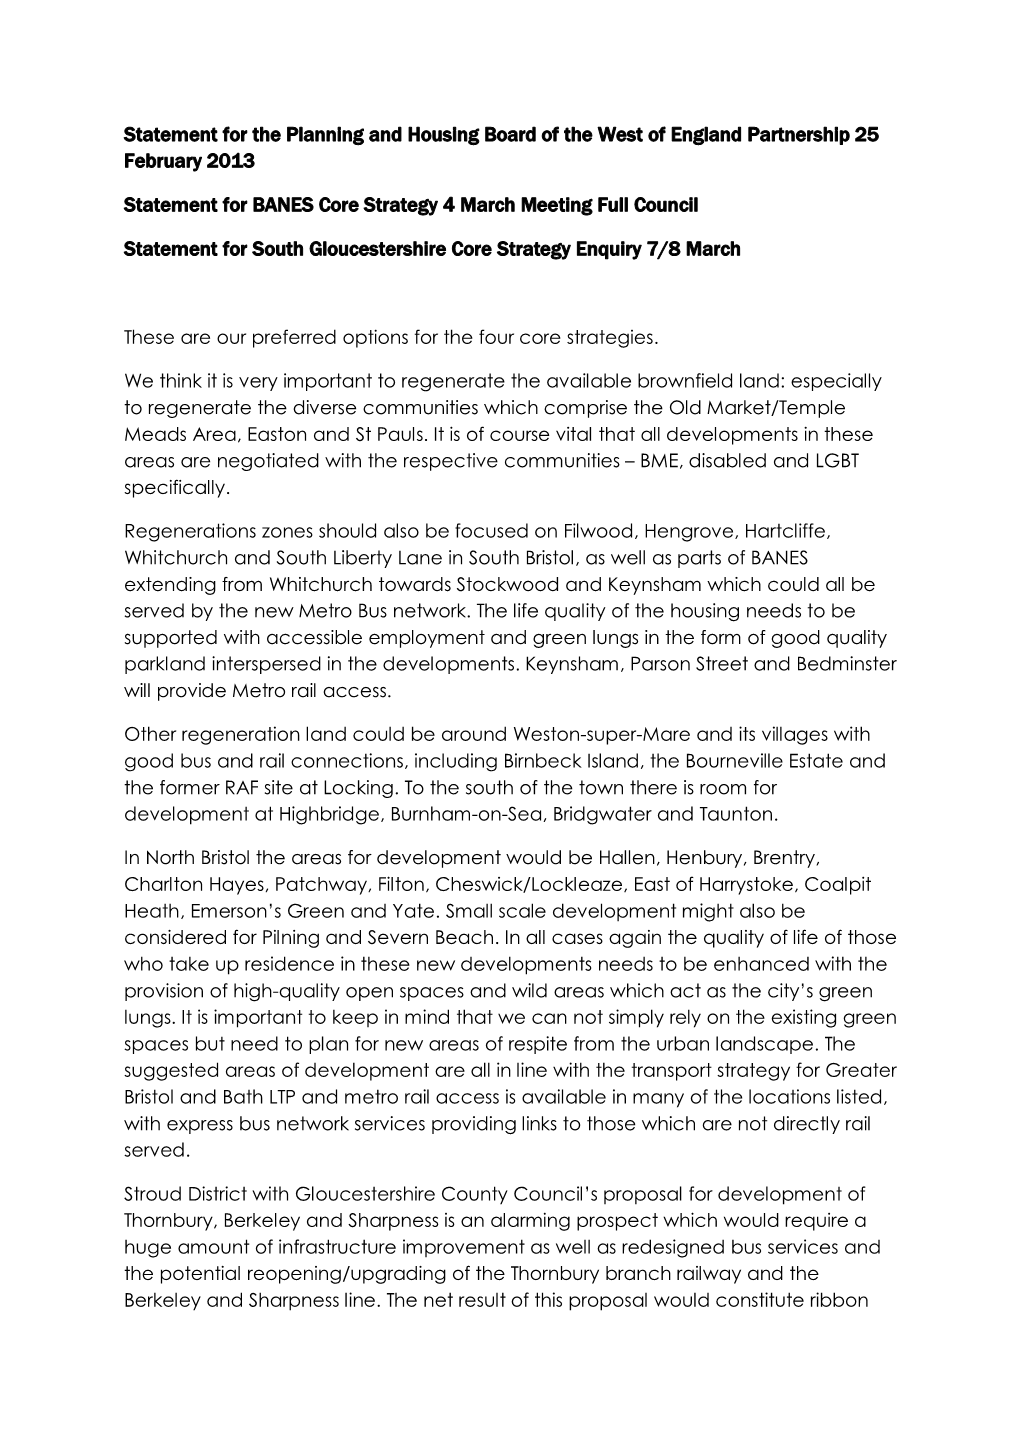 Statement for the Planning and Housing Board of the West of England Partnership 25 February 2013